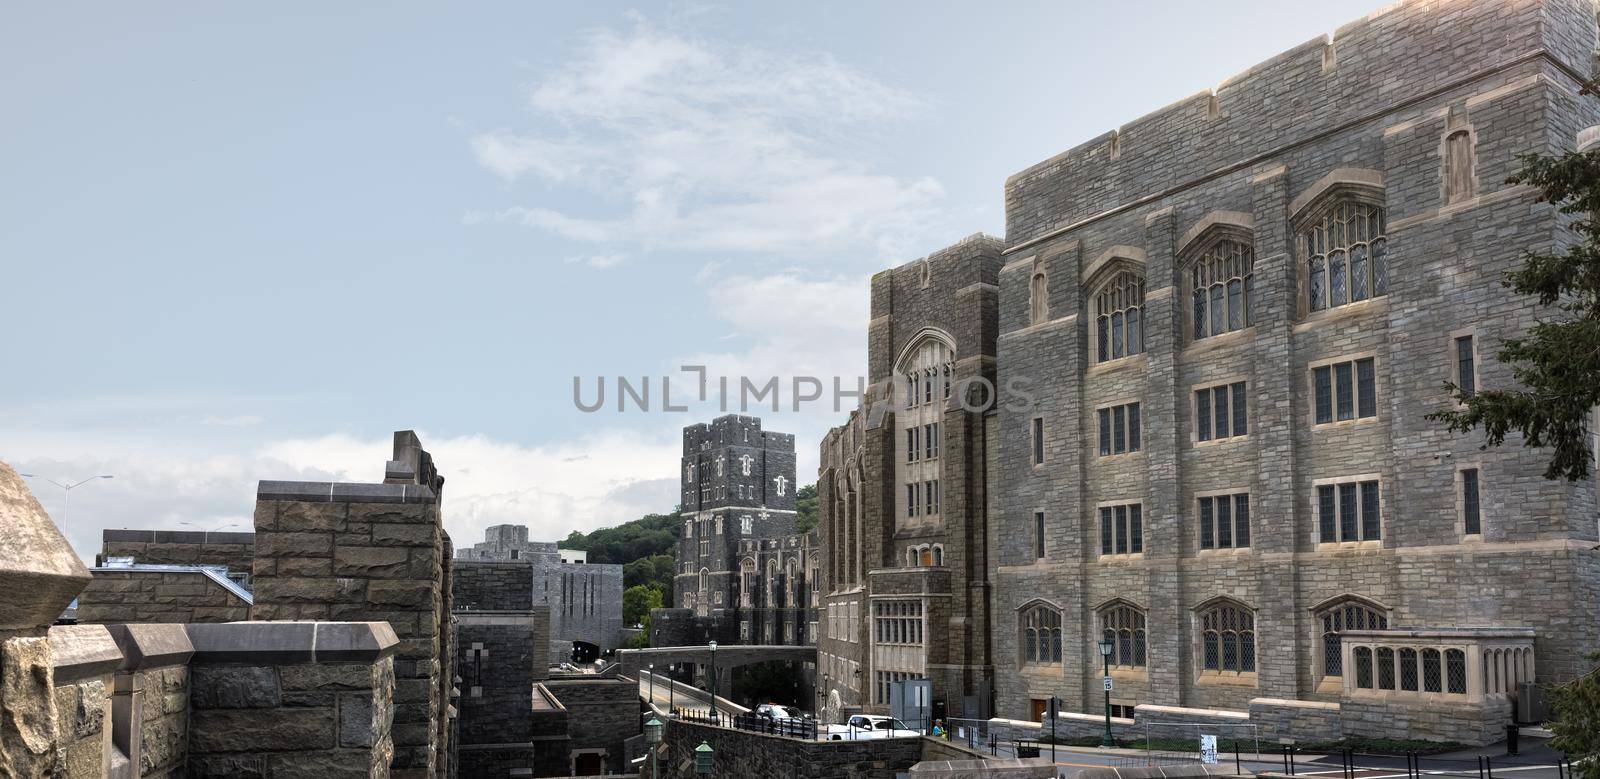 NEW YORK, USA - Sep 18, 2017: United States Military Academy (USMA), also known as West Point, Army, The Academy is a four-year coeducational federal service academy located in West Point, New York